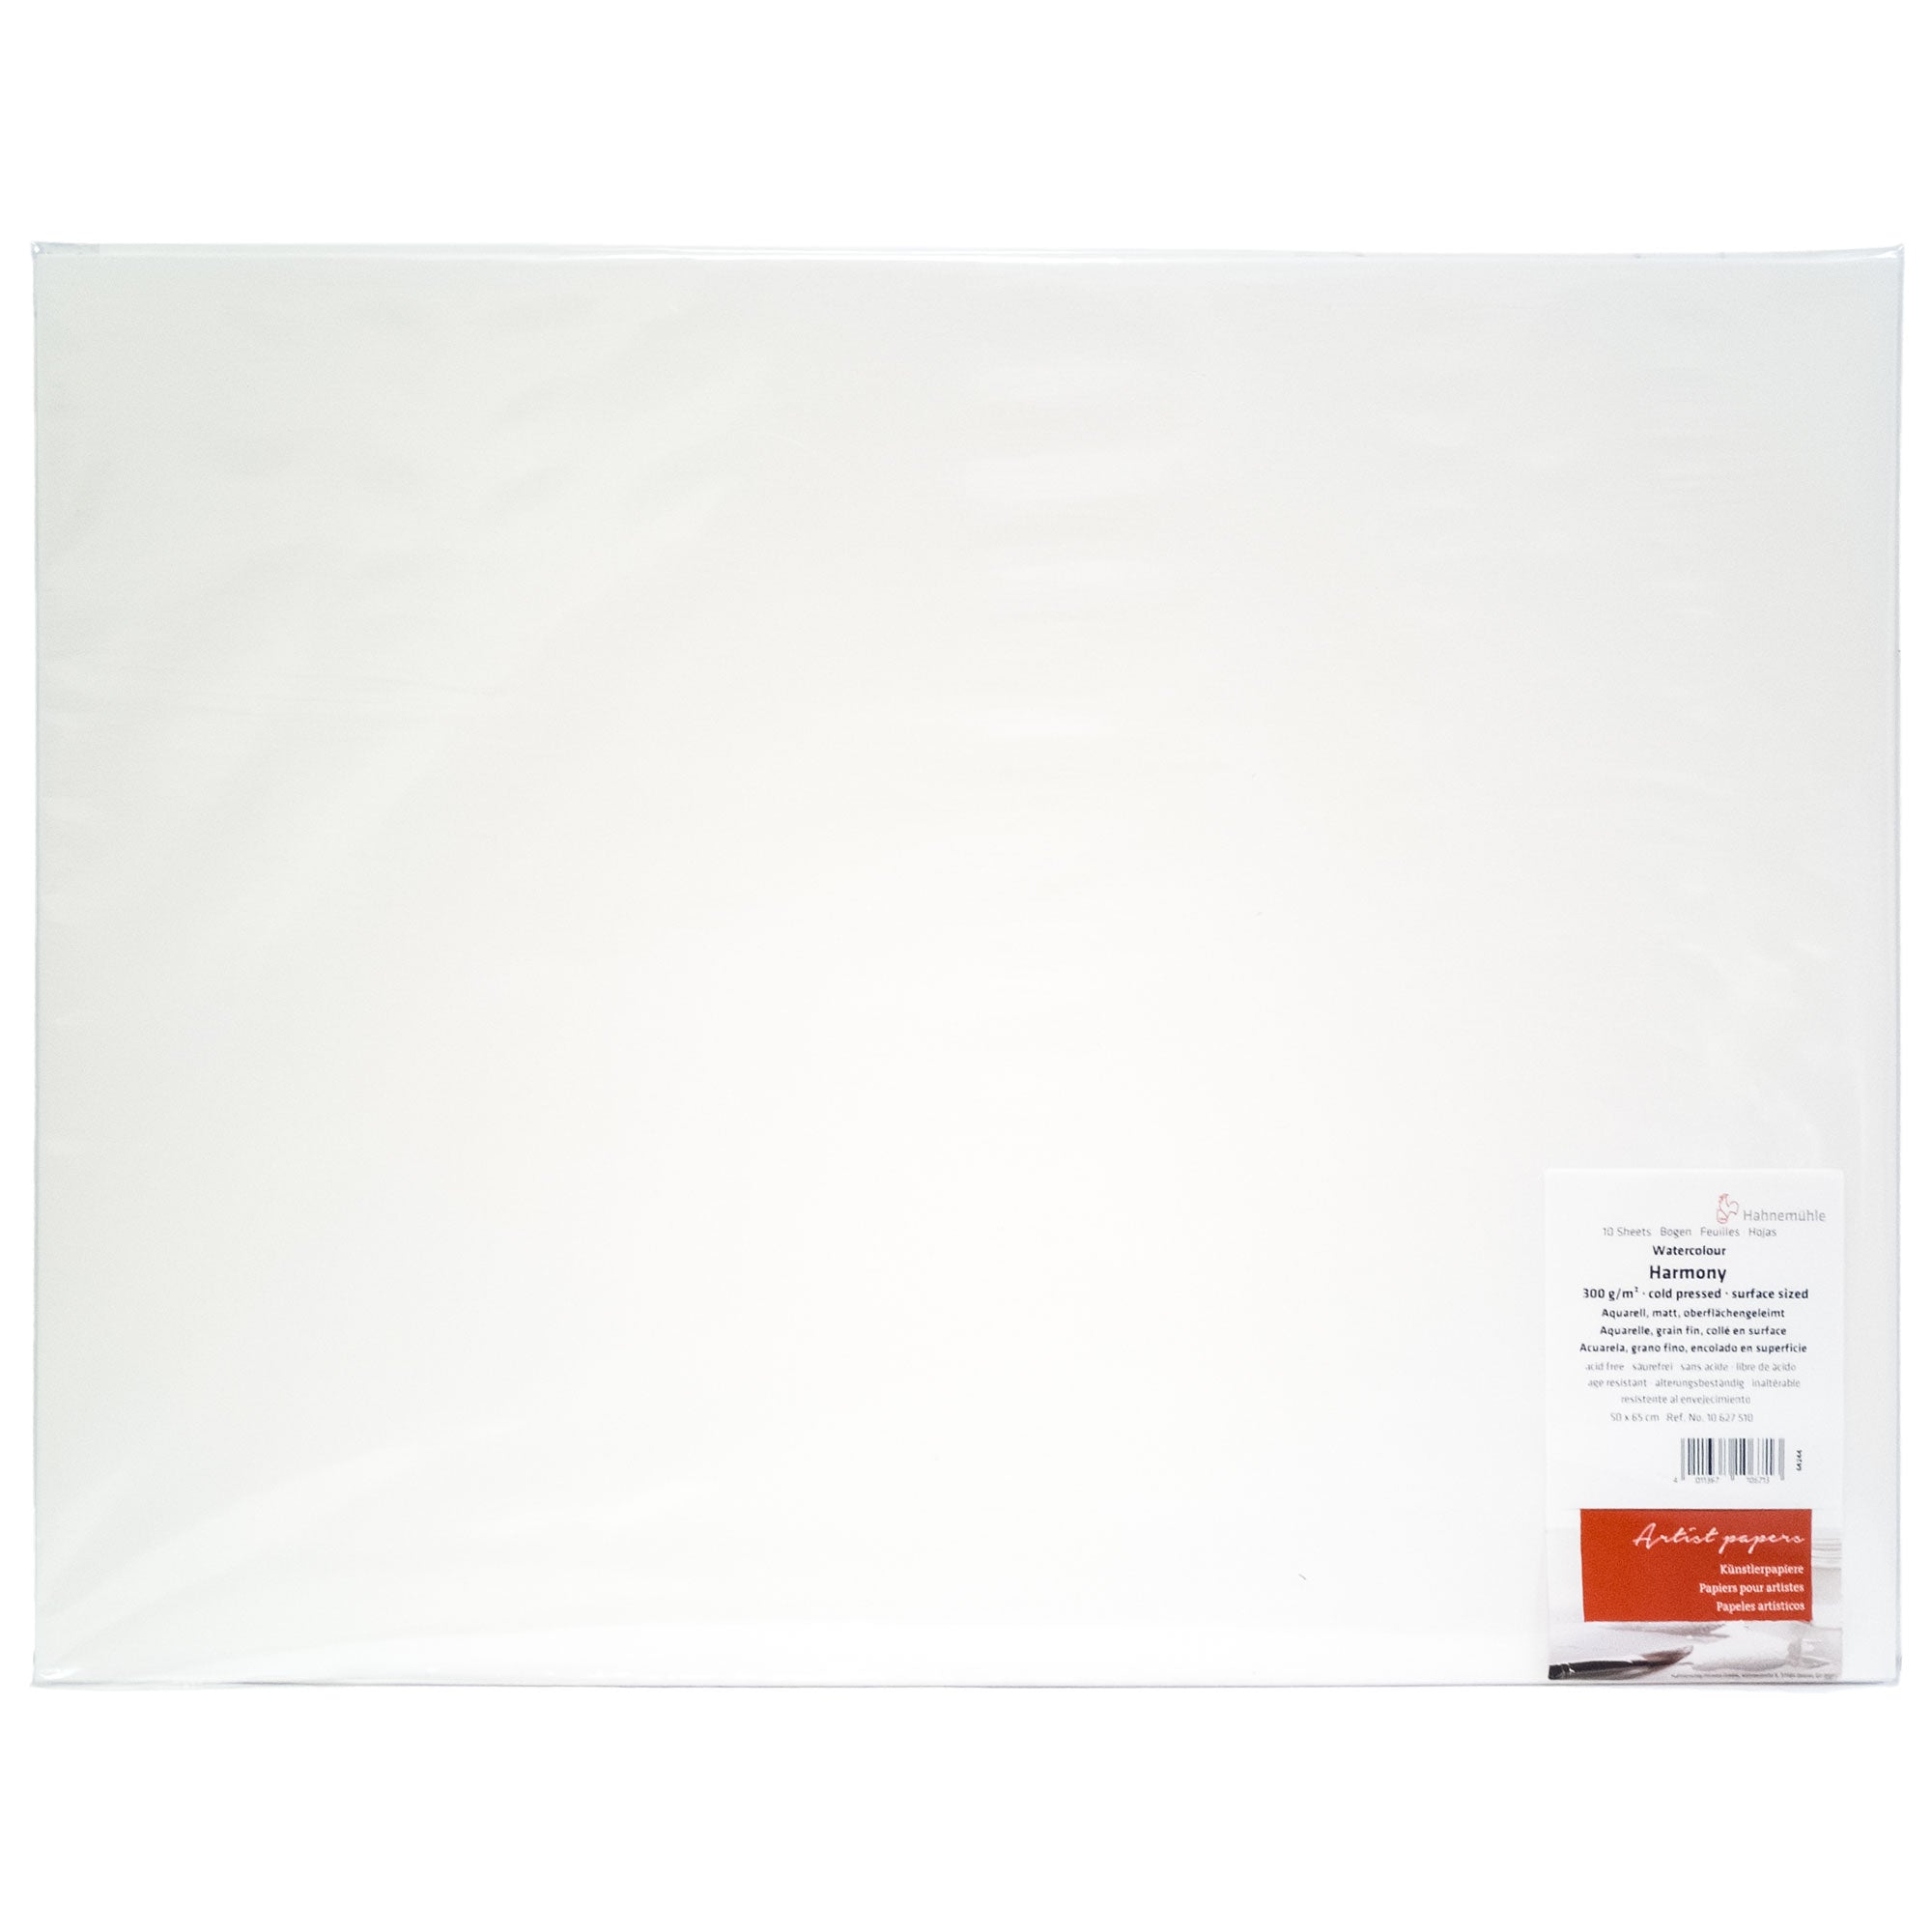 Saunders Waterford Watercolor Paper - 200 lb. Cold Press 22 x 30 10 Sheets